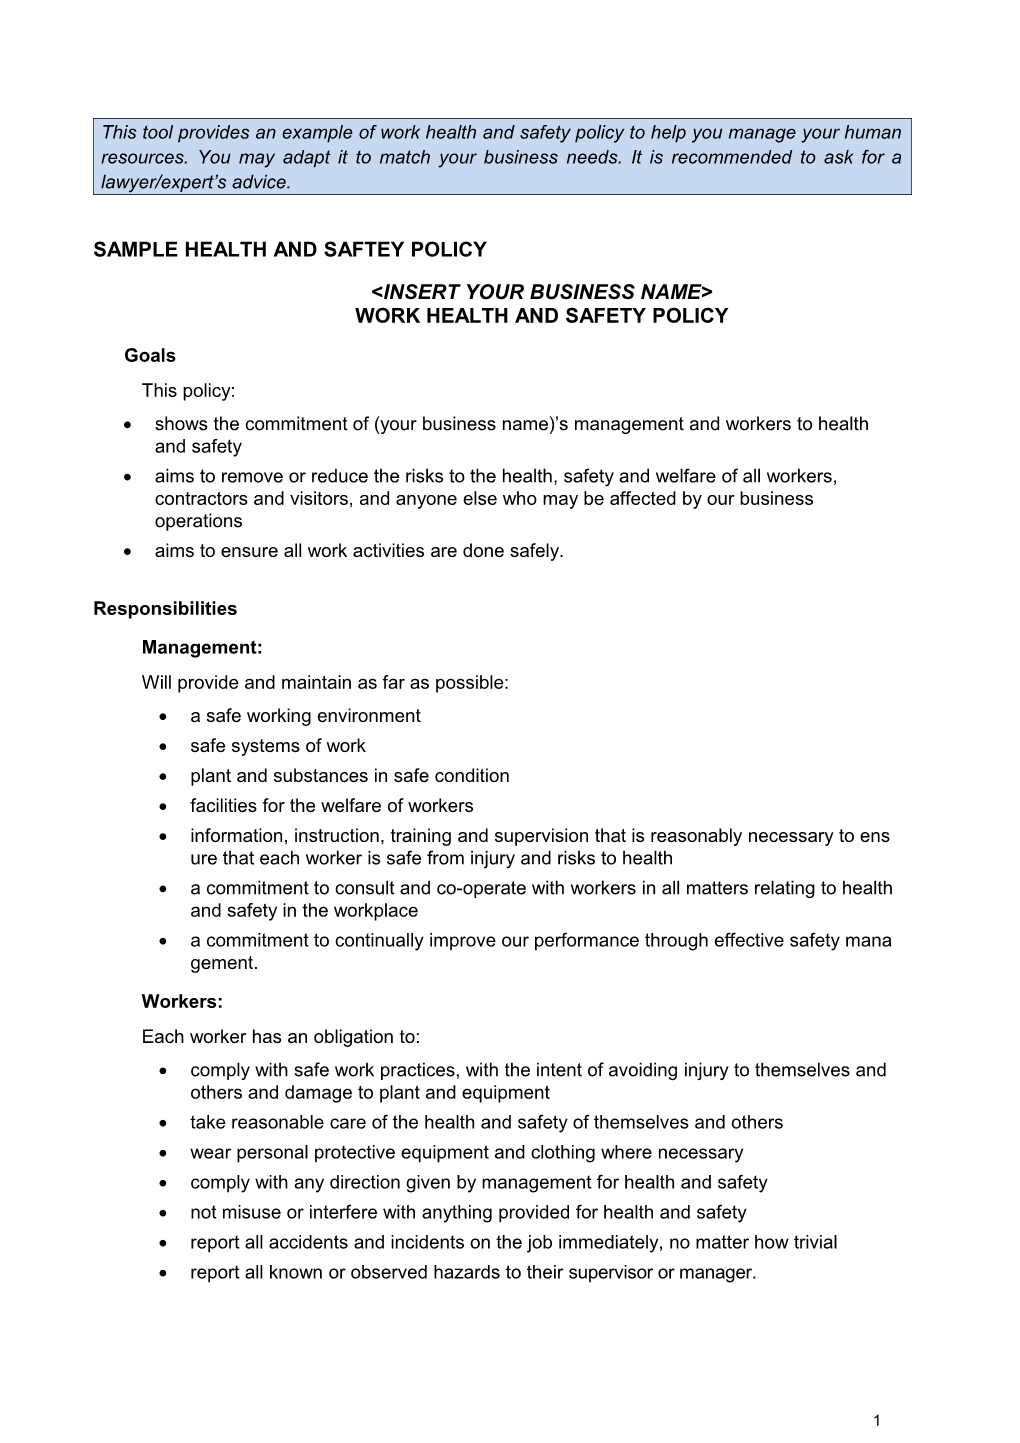 Work Health and Safety Policy - Samples s1